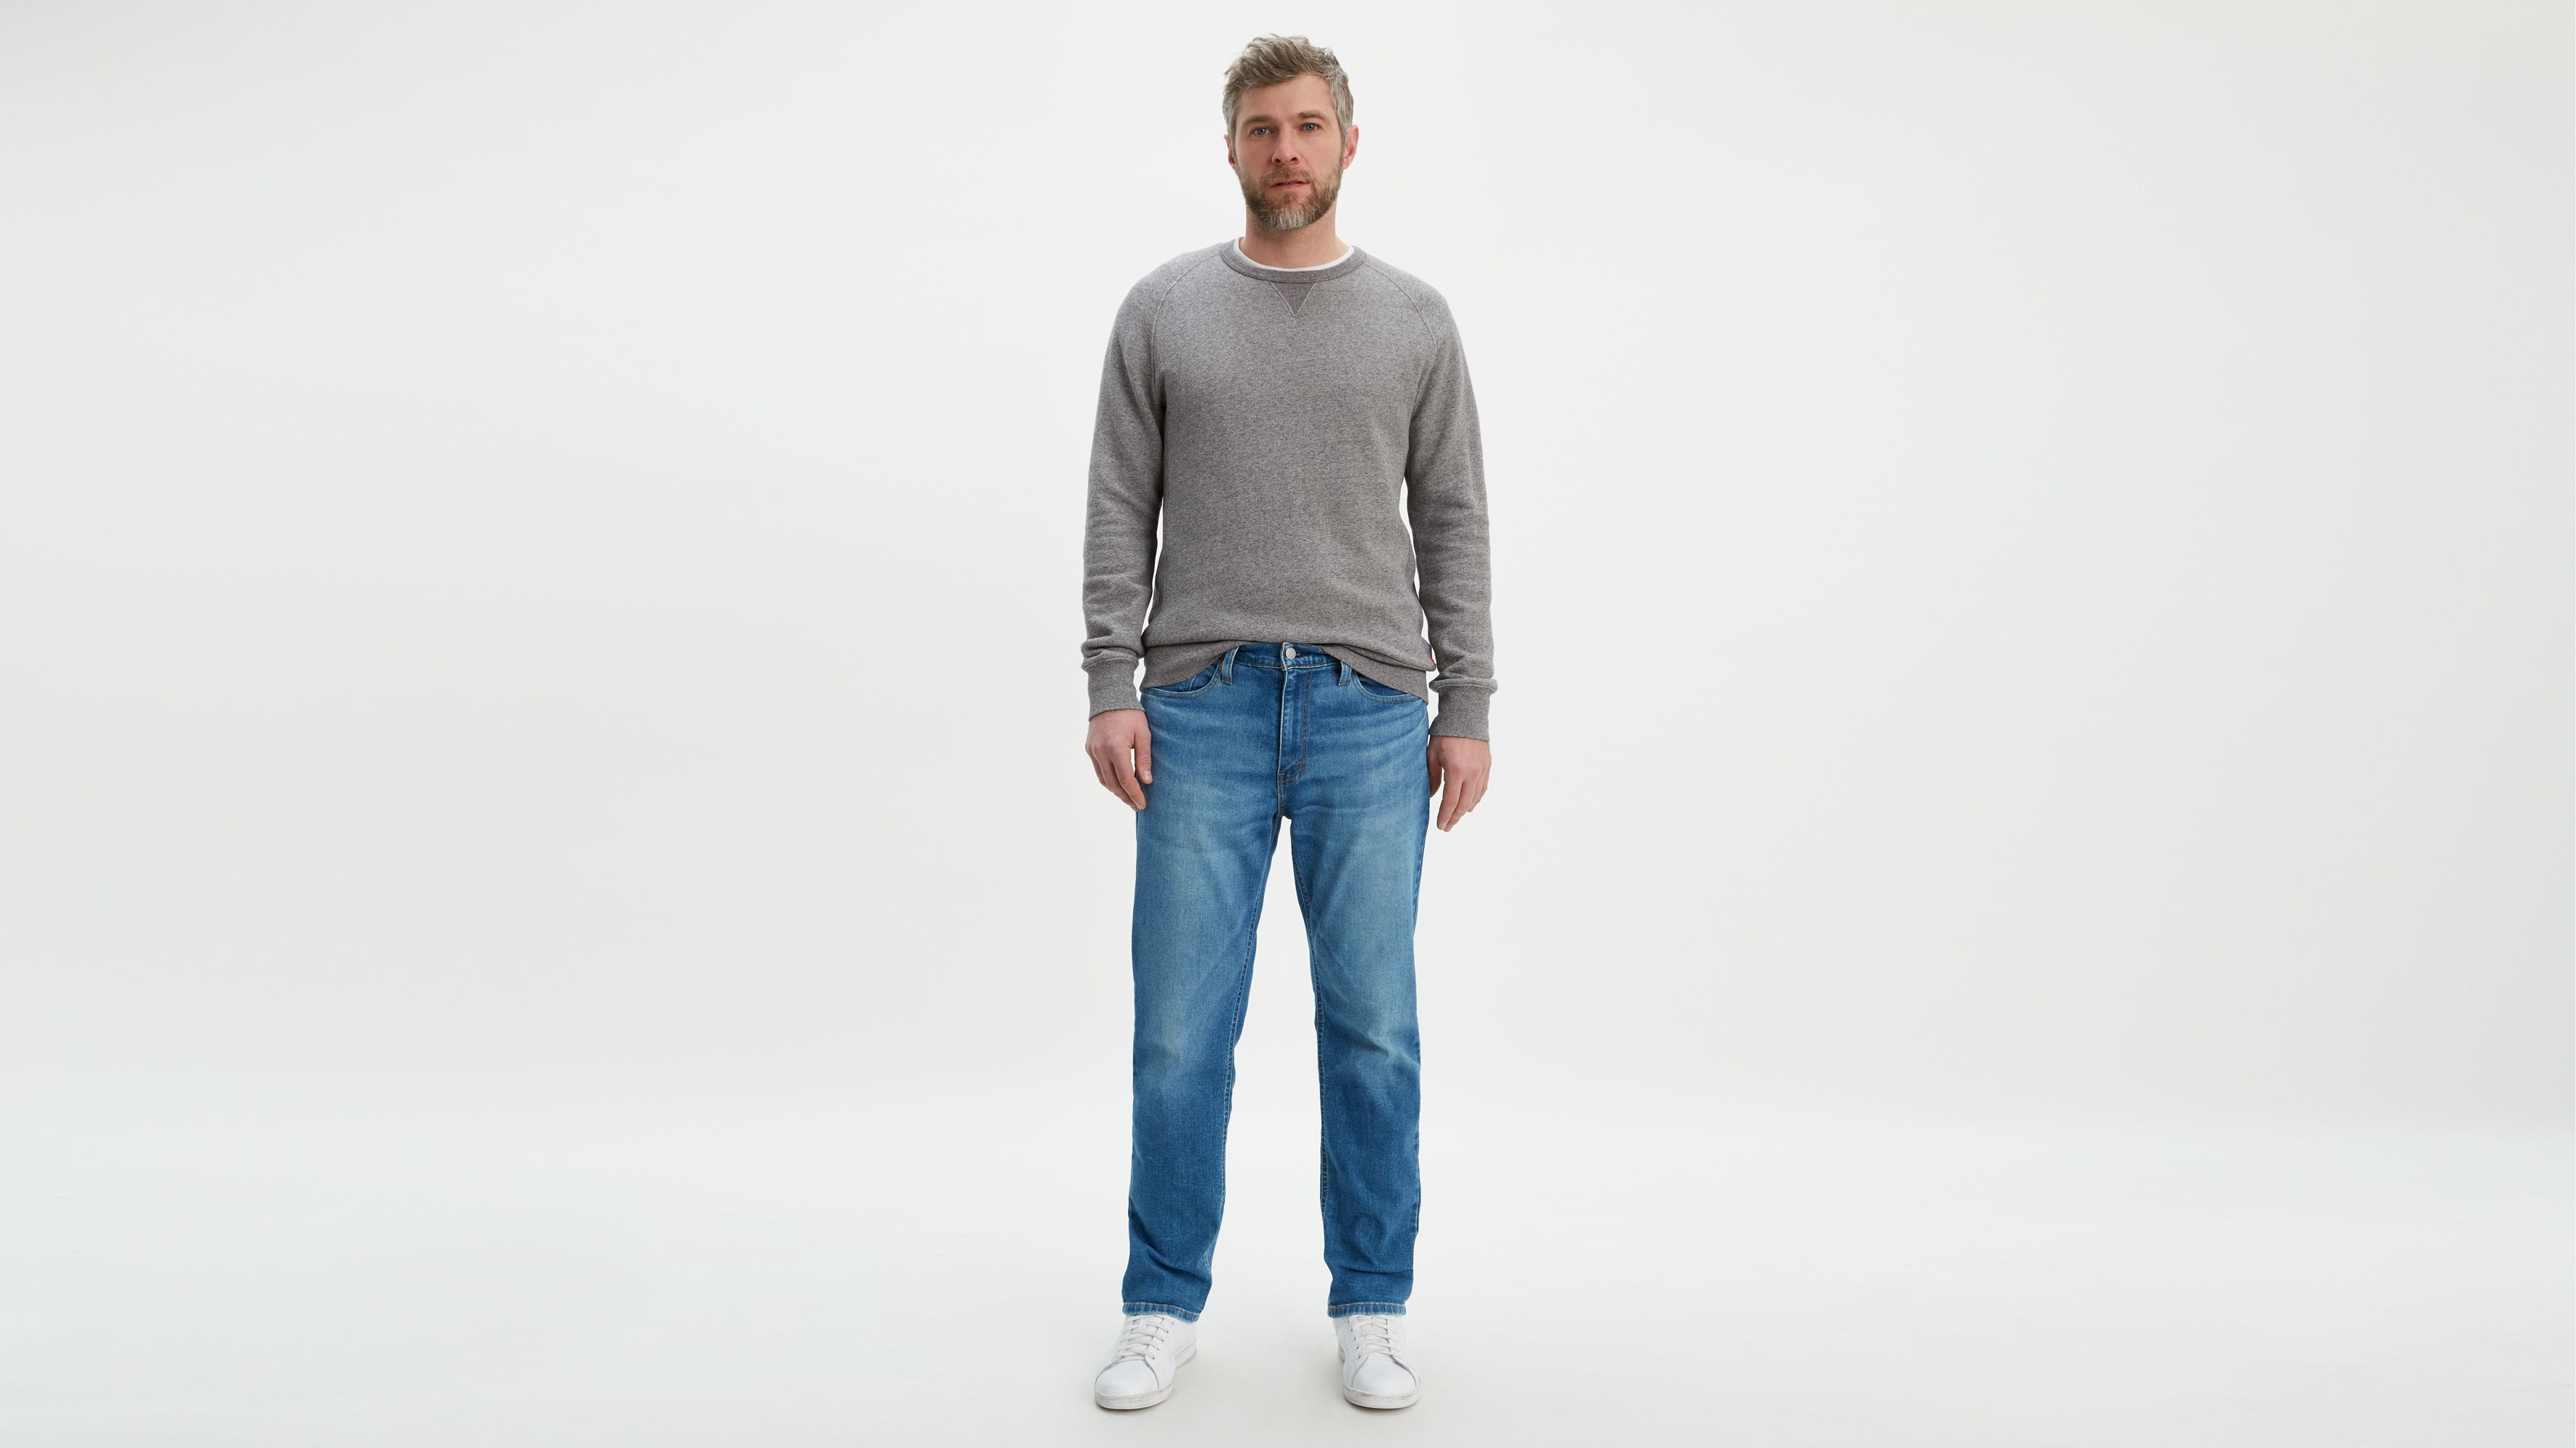 athletic tapered jeans